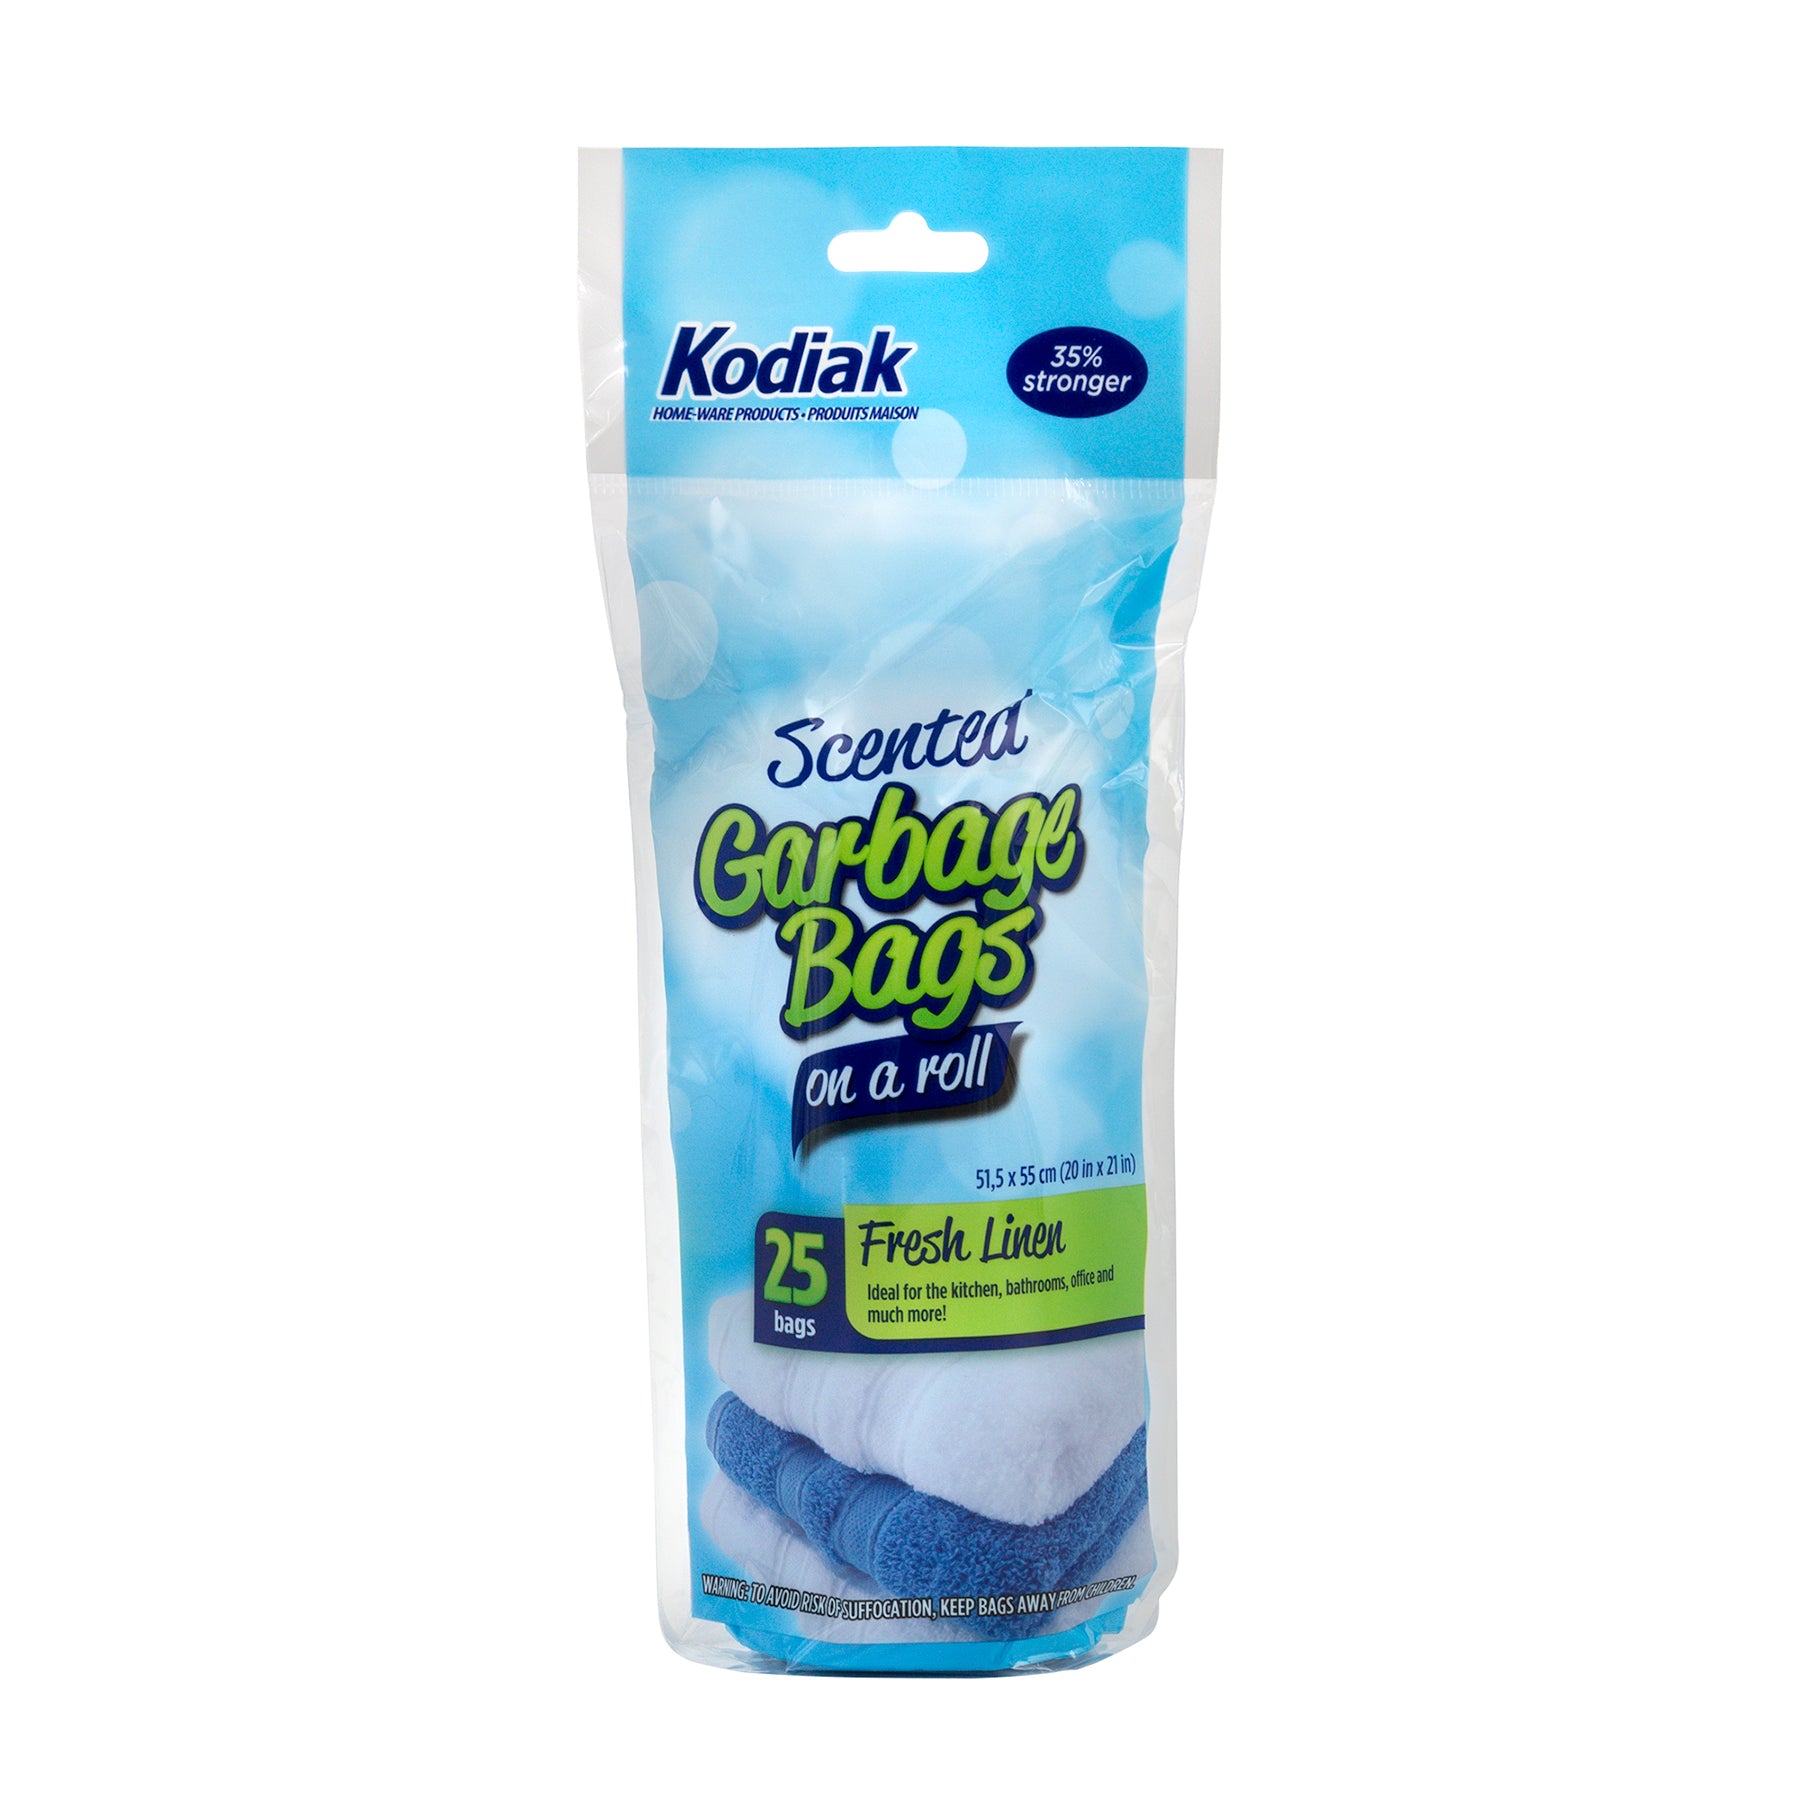 Kodiak 25 Scented Garbage Bags on a Roll 20x21in